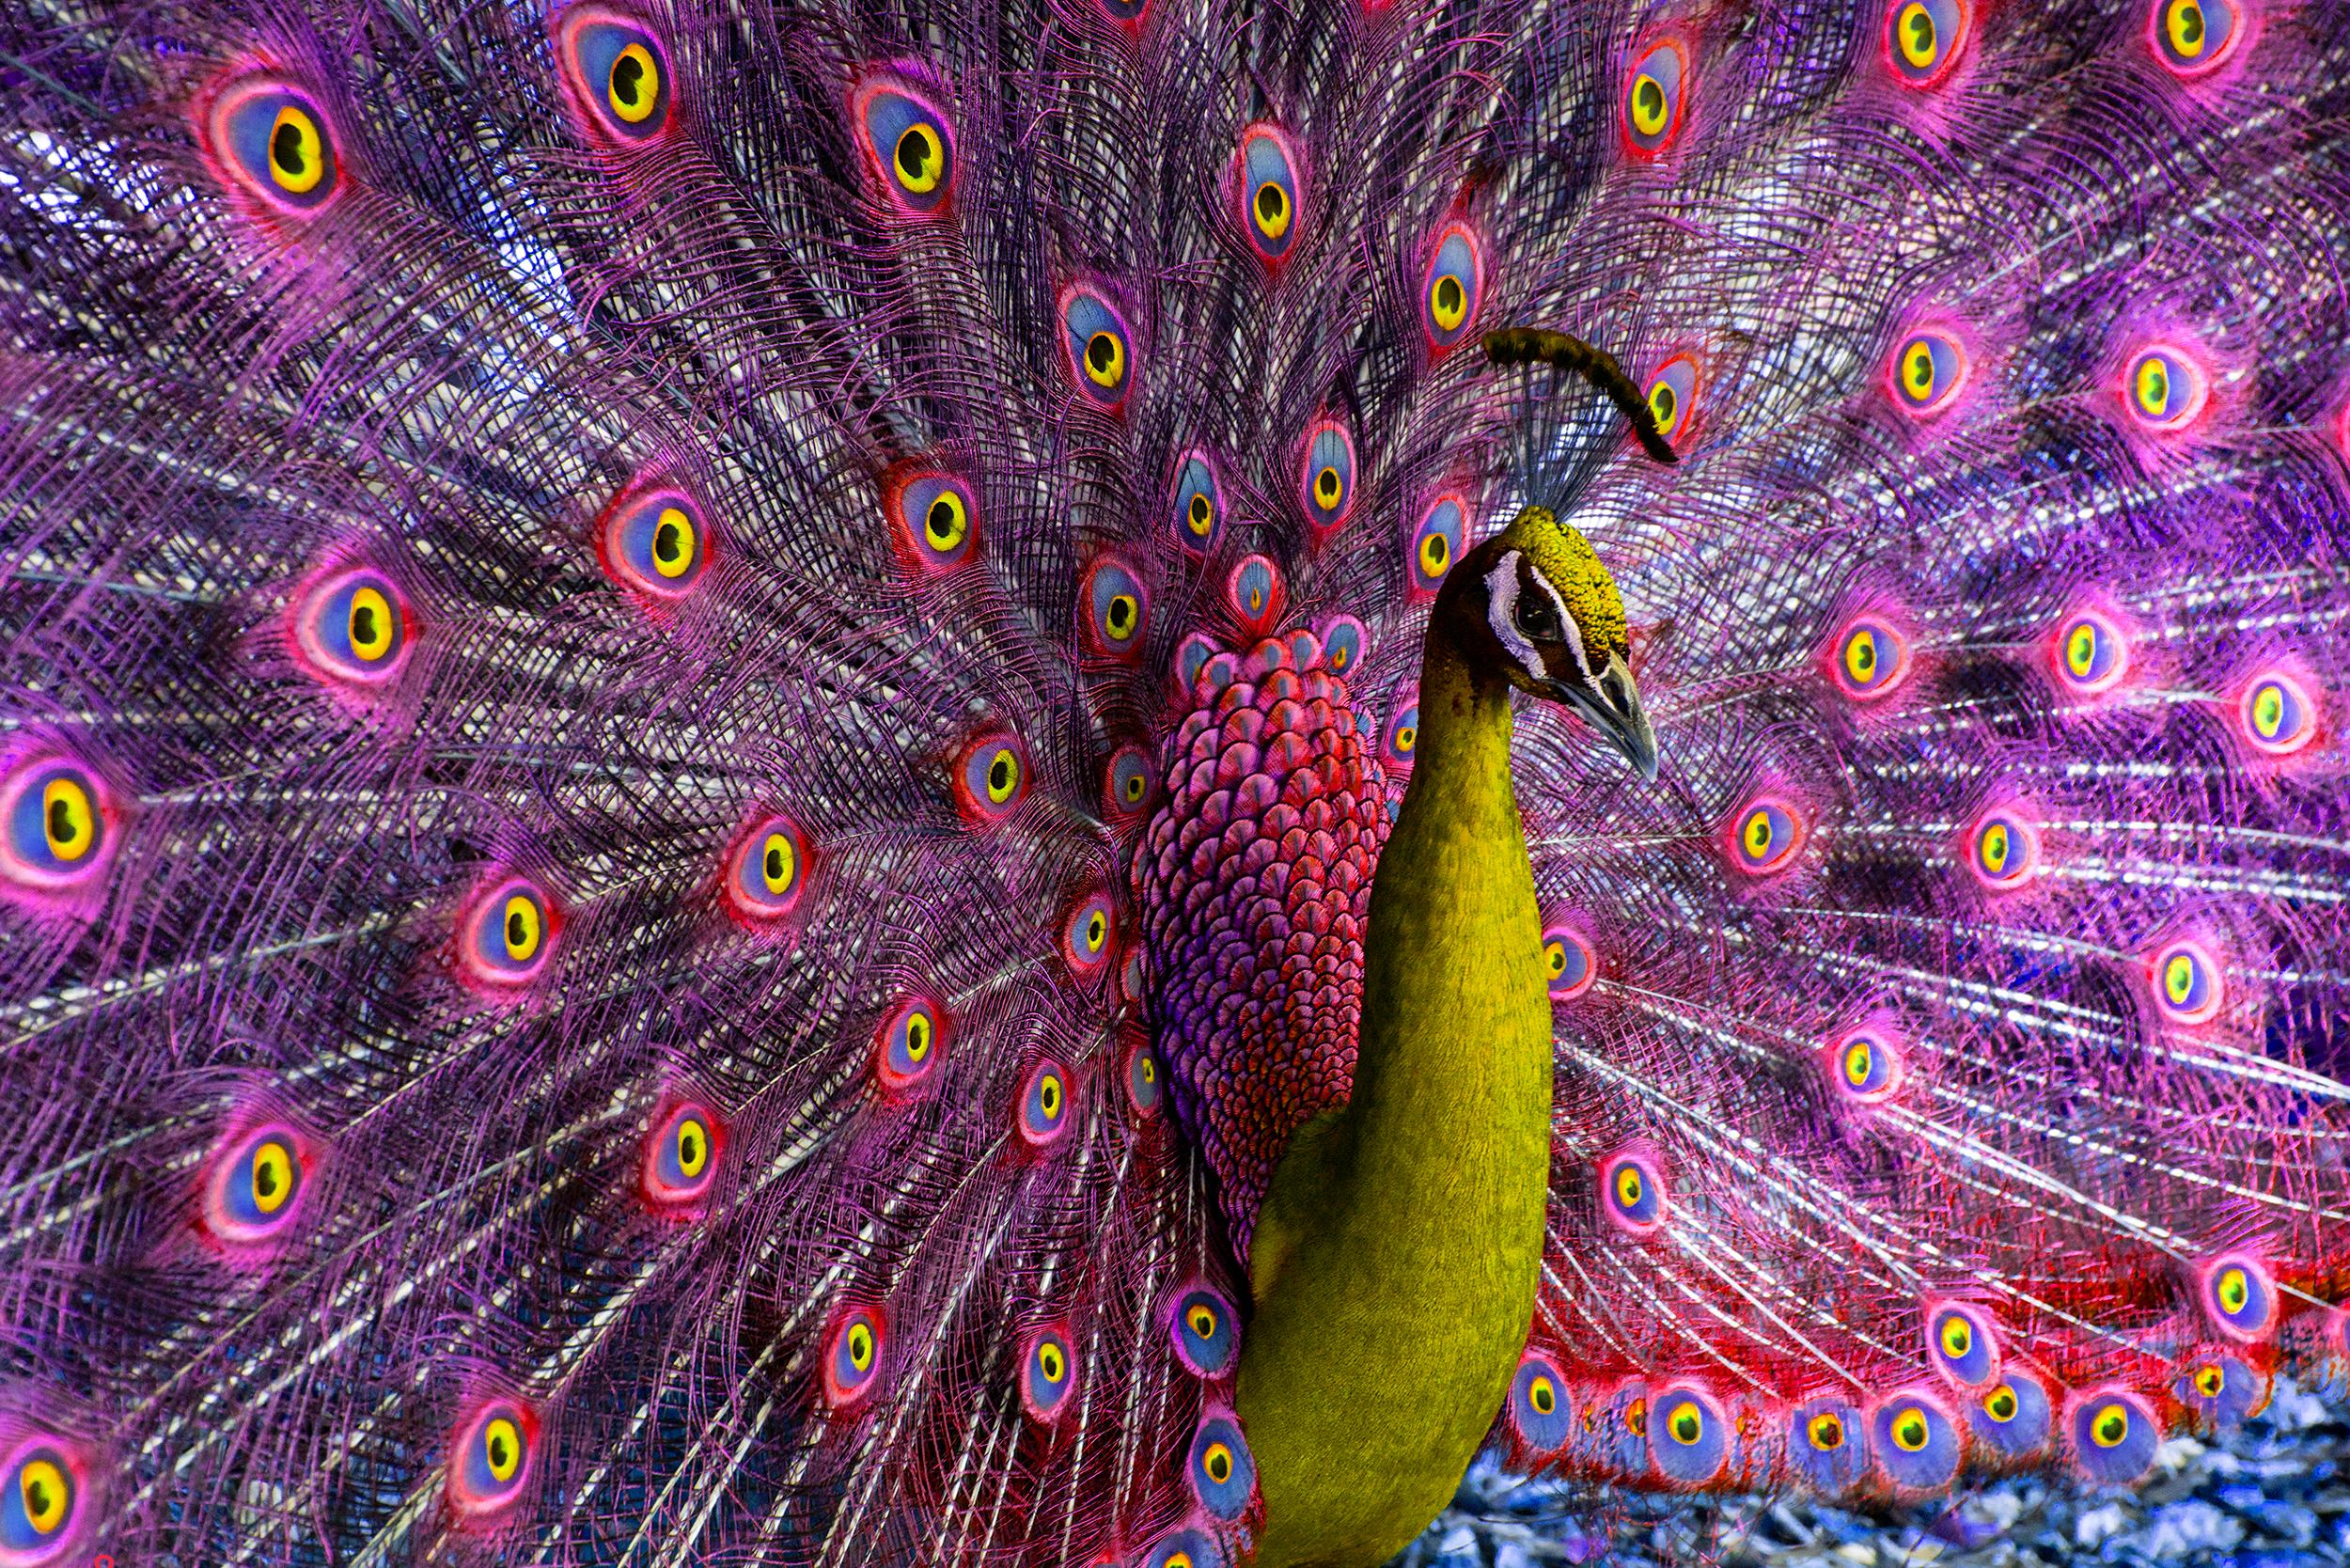 Peacock displaying in Magenta and Yellow Birds